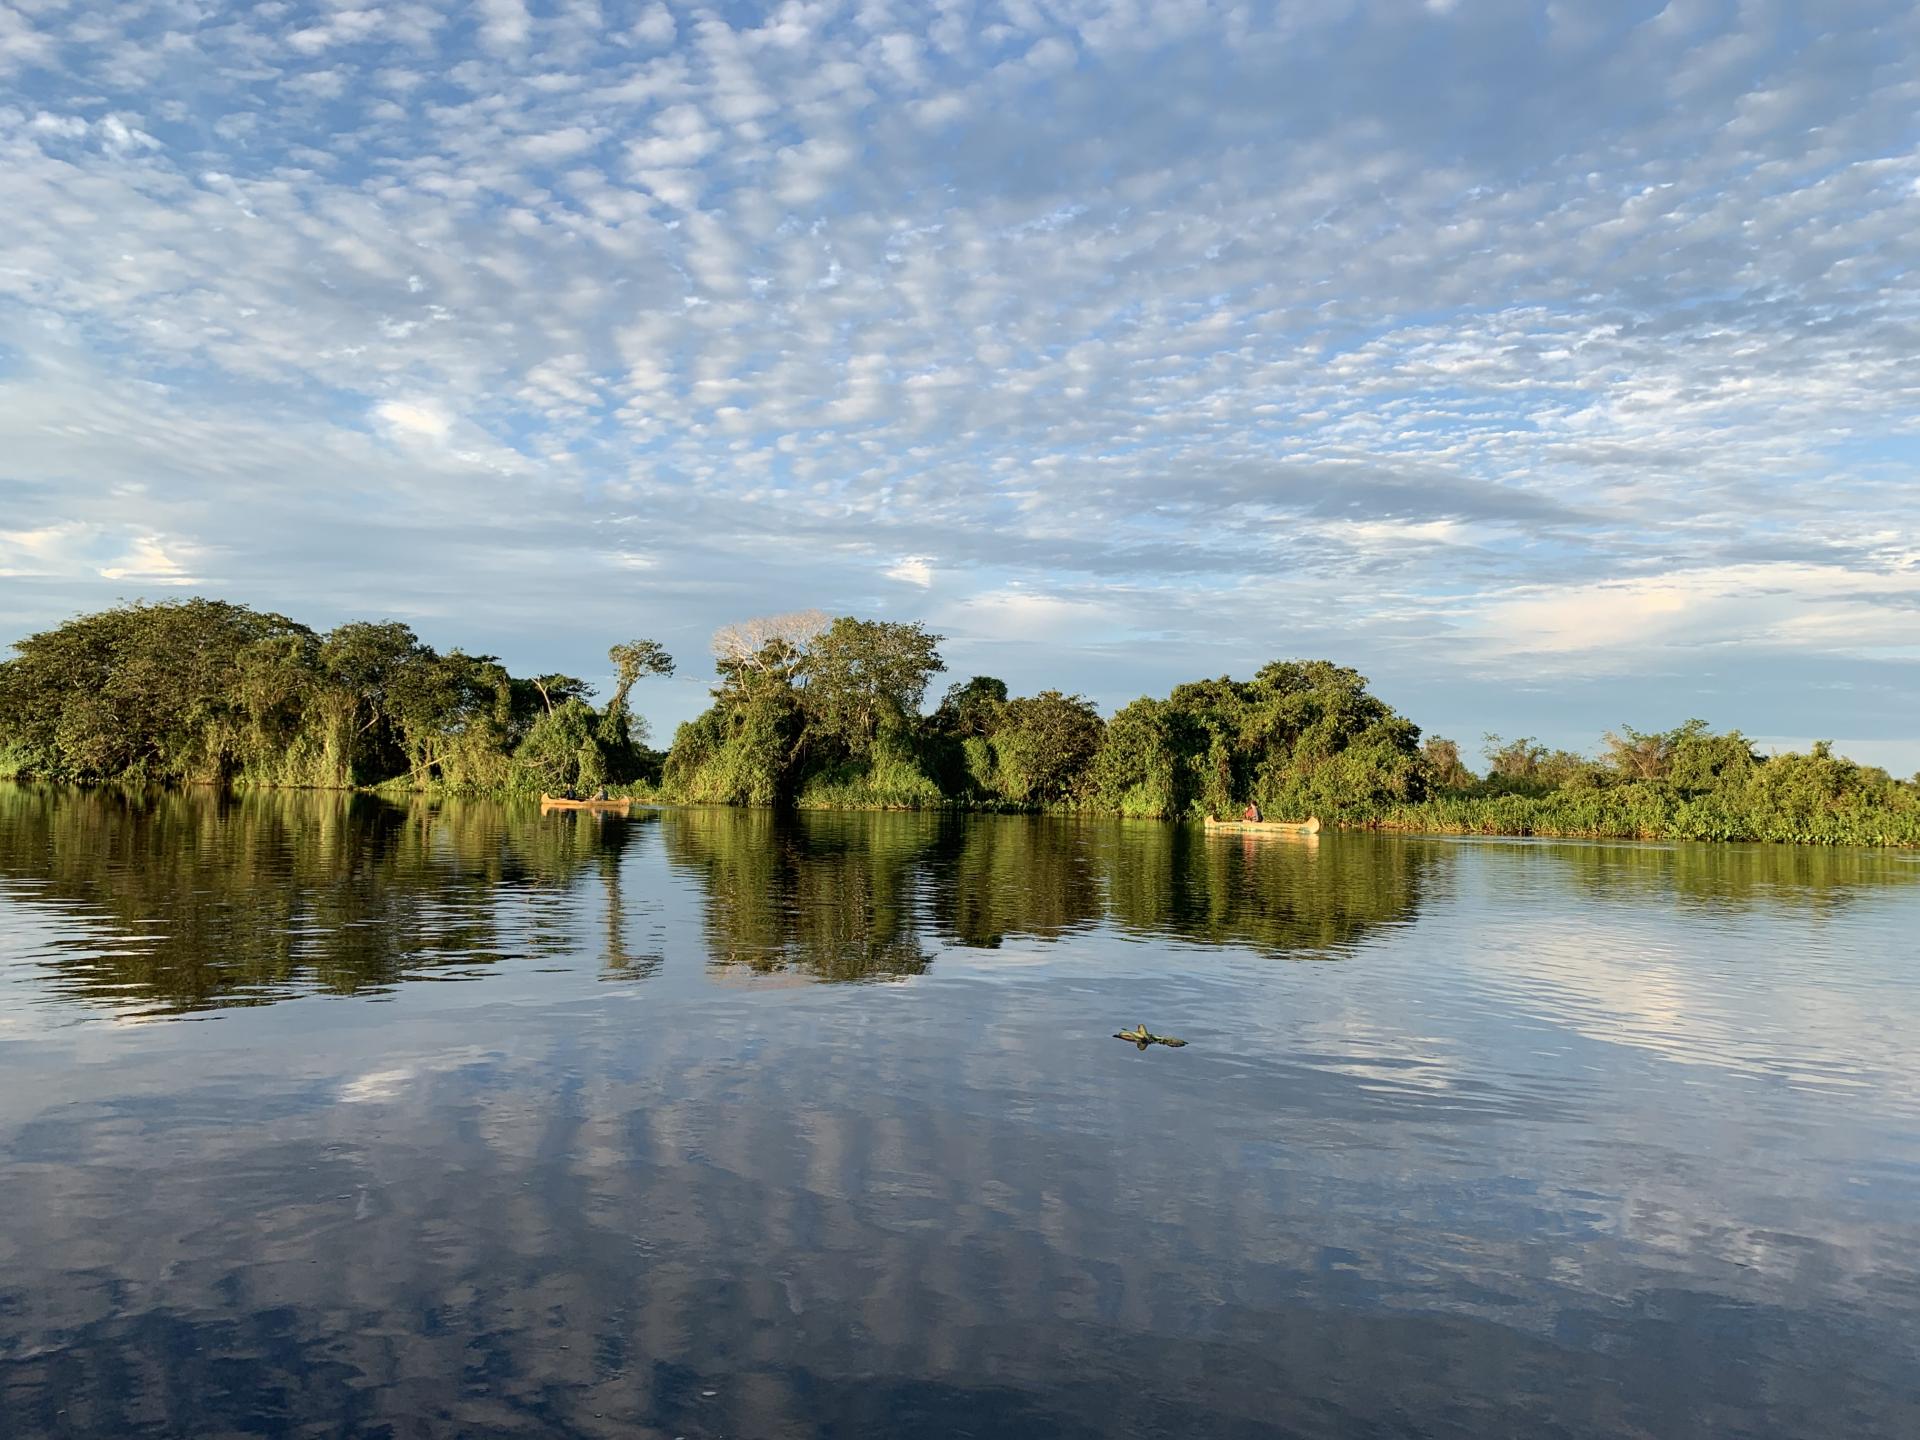 The Pantanal is a fascinating national park landscape in Brazil